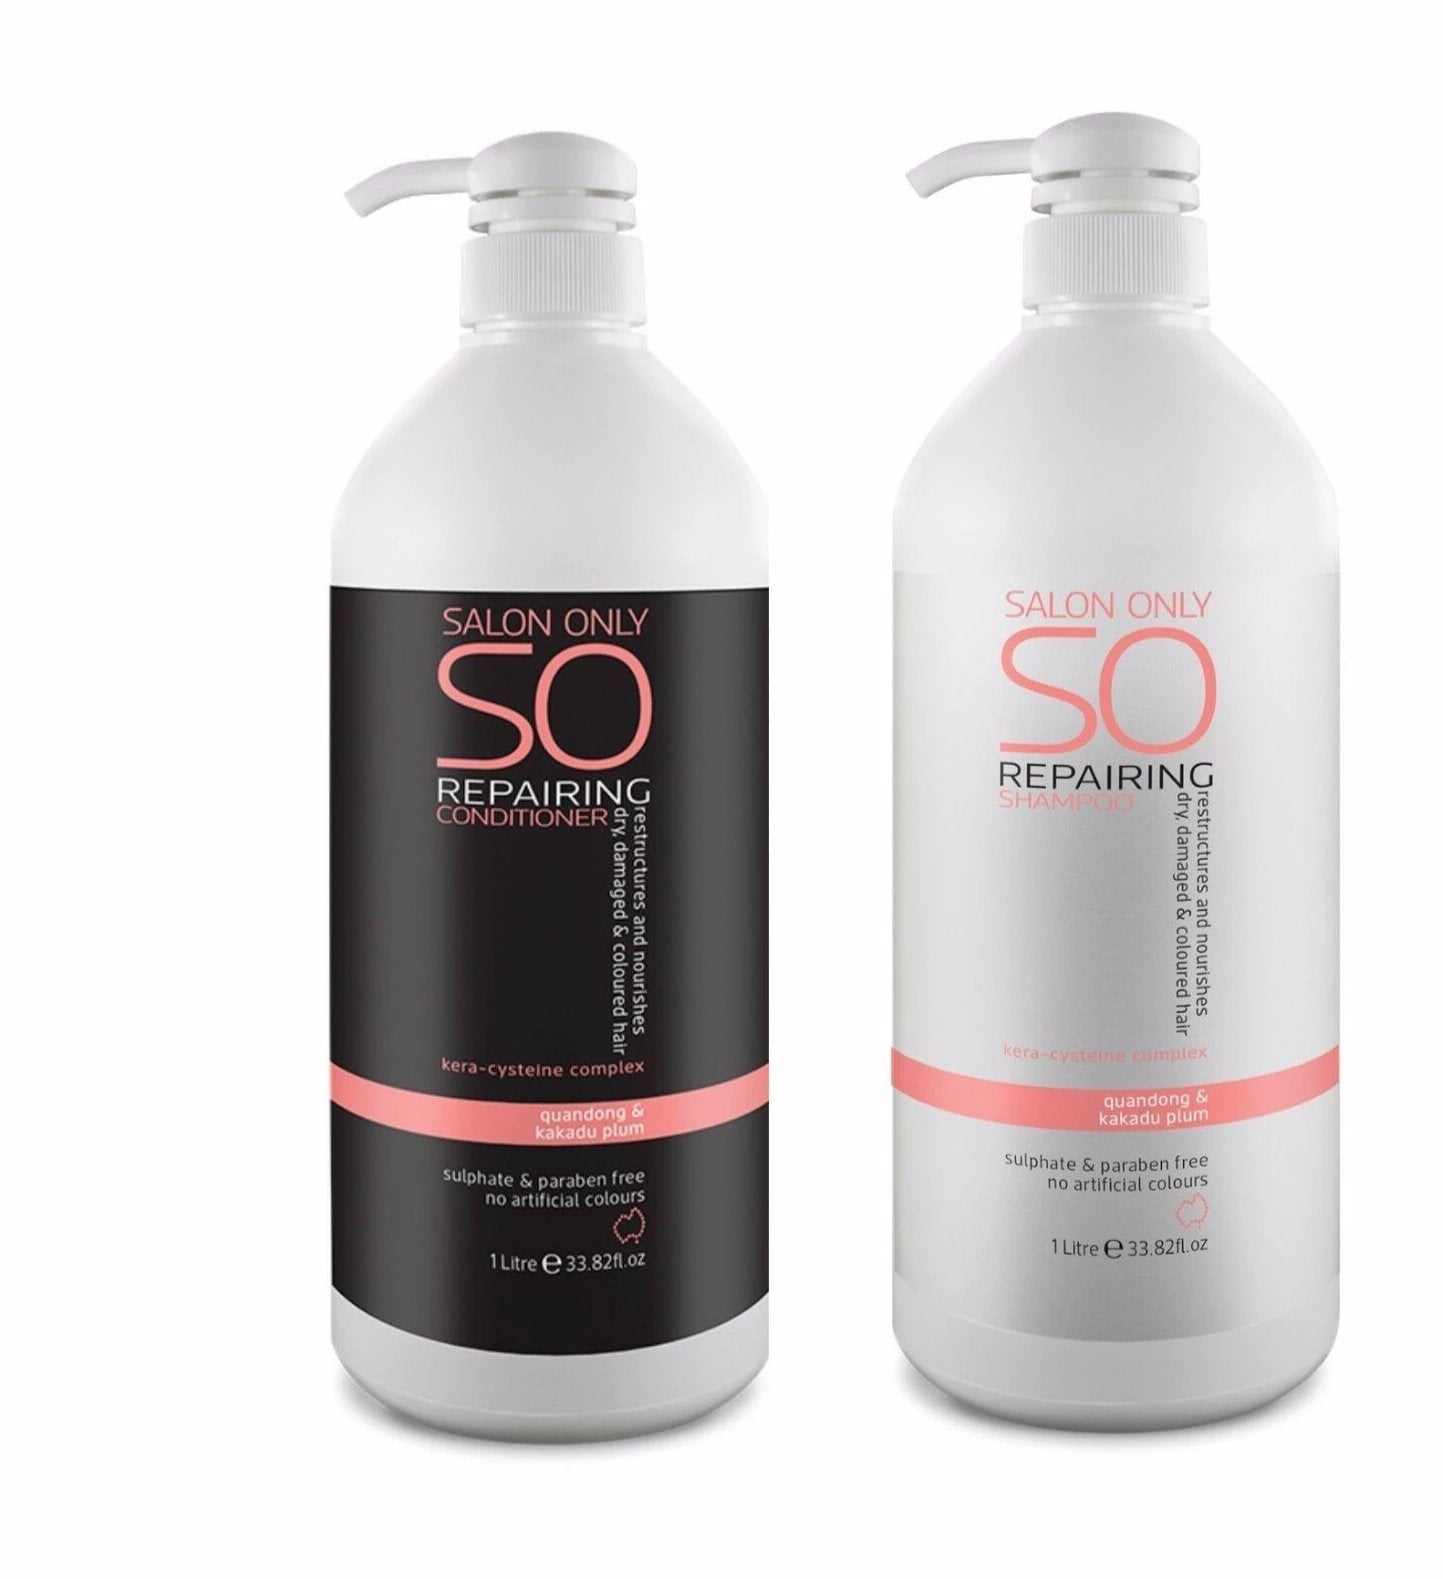 iaahhaircare,SO Repairing 1Lt DUO Shampoo & Conditioner 1lt each Salon Only,Shampoo and Conditioner,Salon Only Repairing